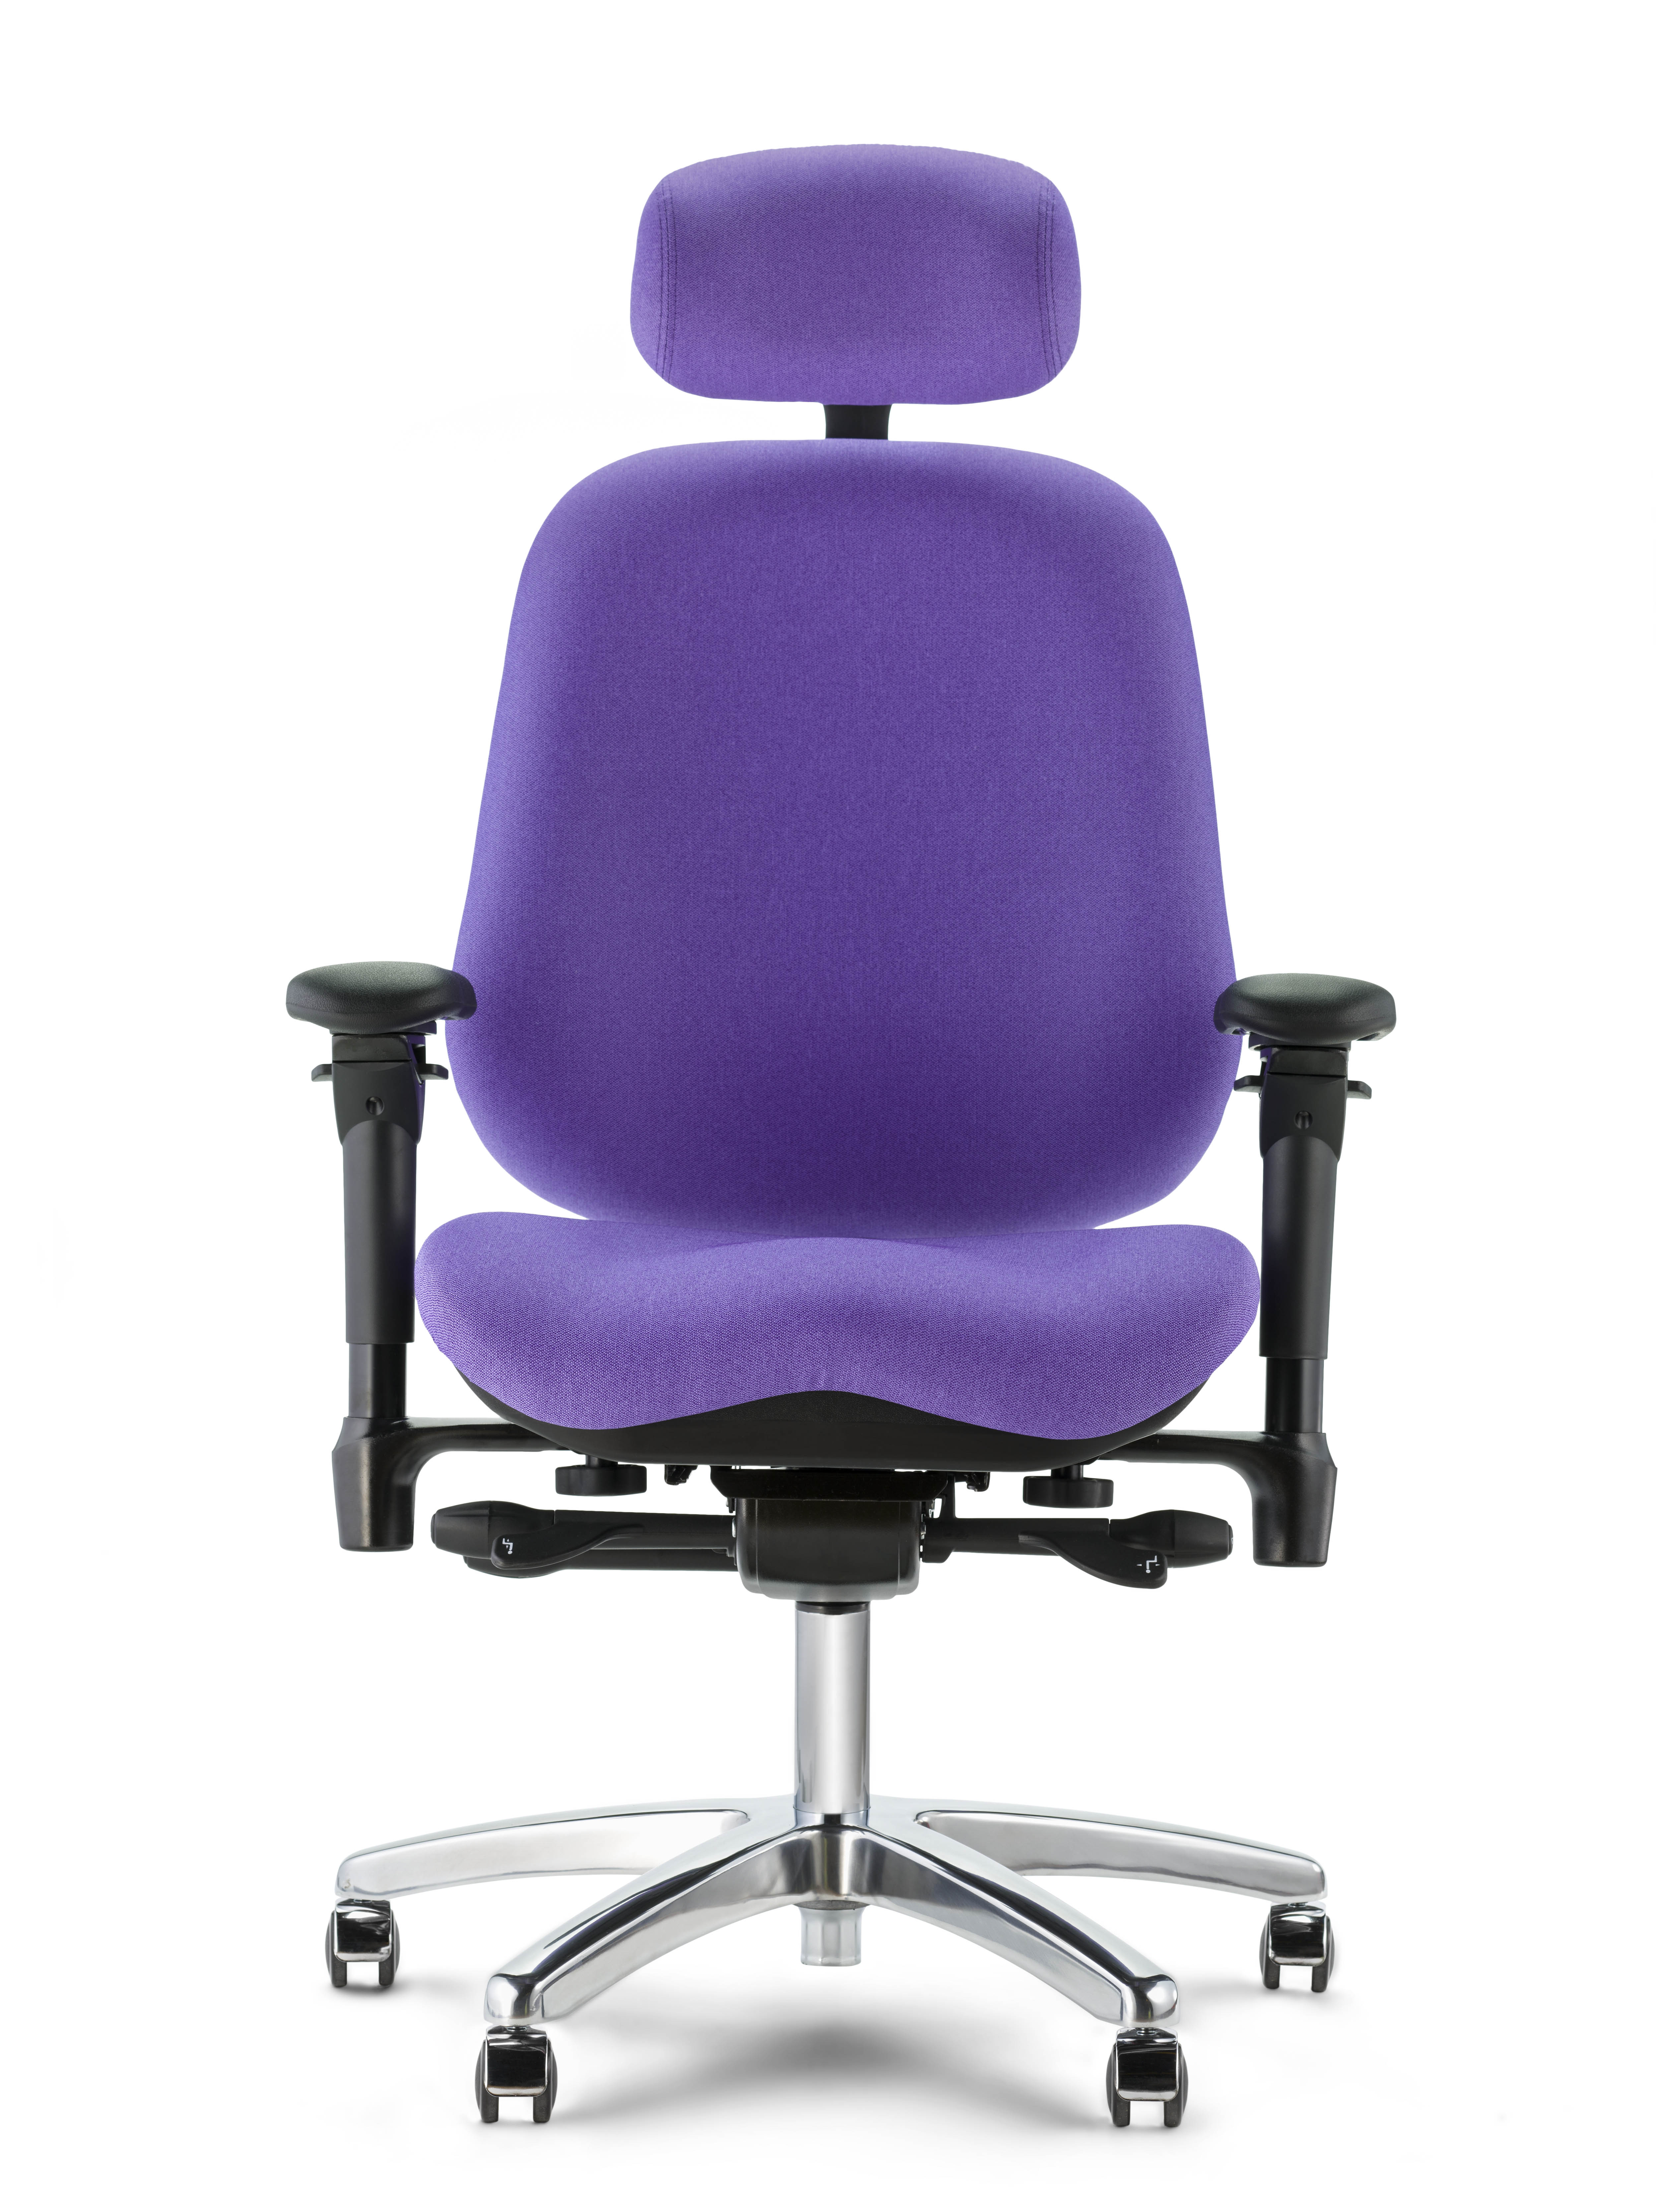 R3507 B13 executive chair chrome base Infinity Hyacinth front view